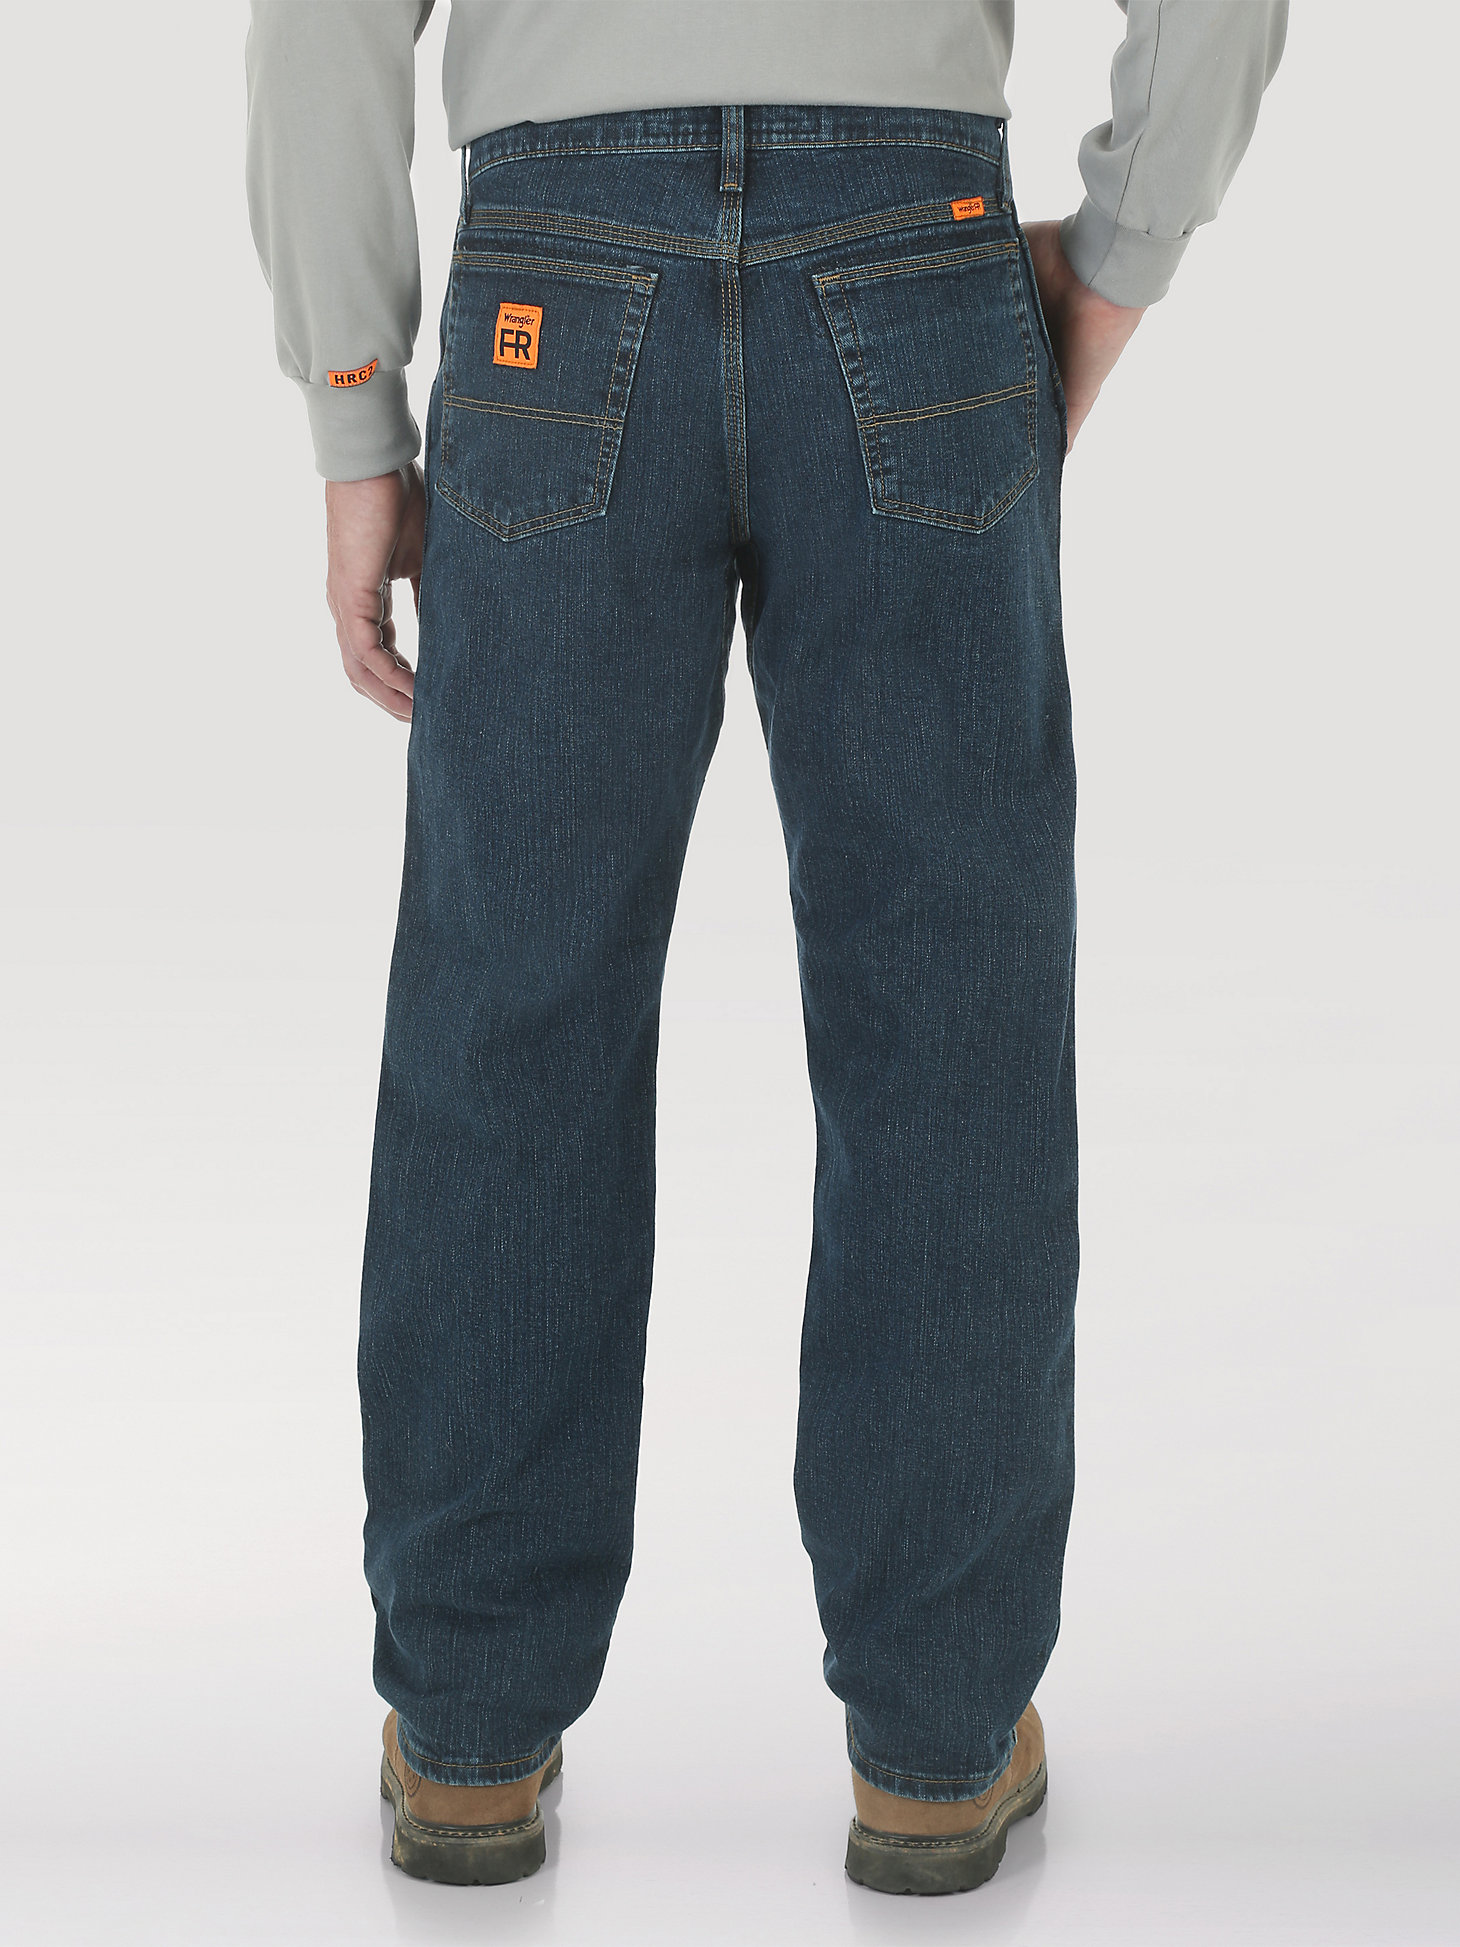 Wrangler® RIGGS Workwear® FR Flame Resistant Advanced Comfort Relaxed Fit Jean in Midstone alternative view 1